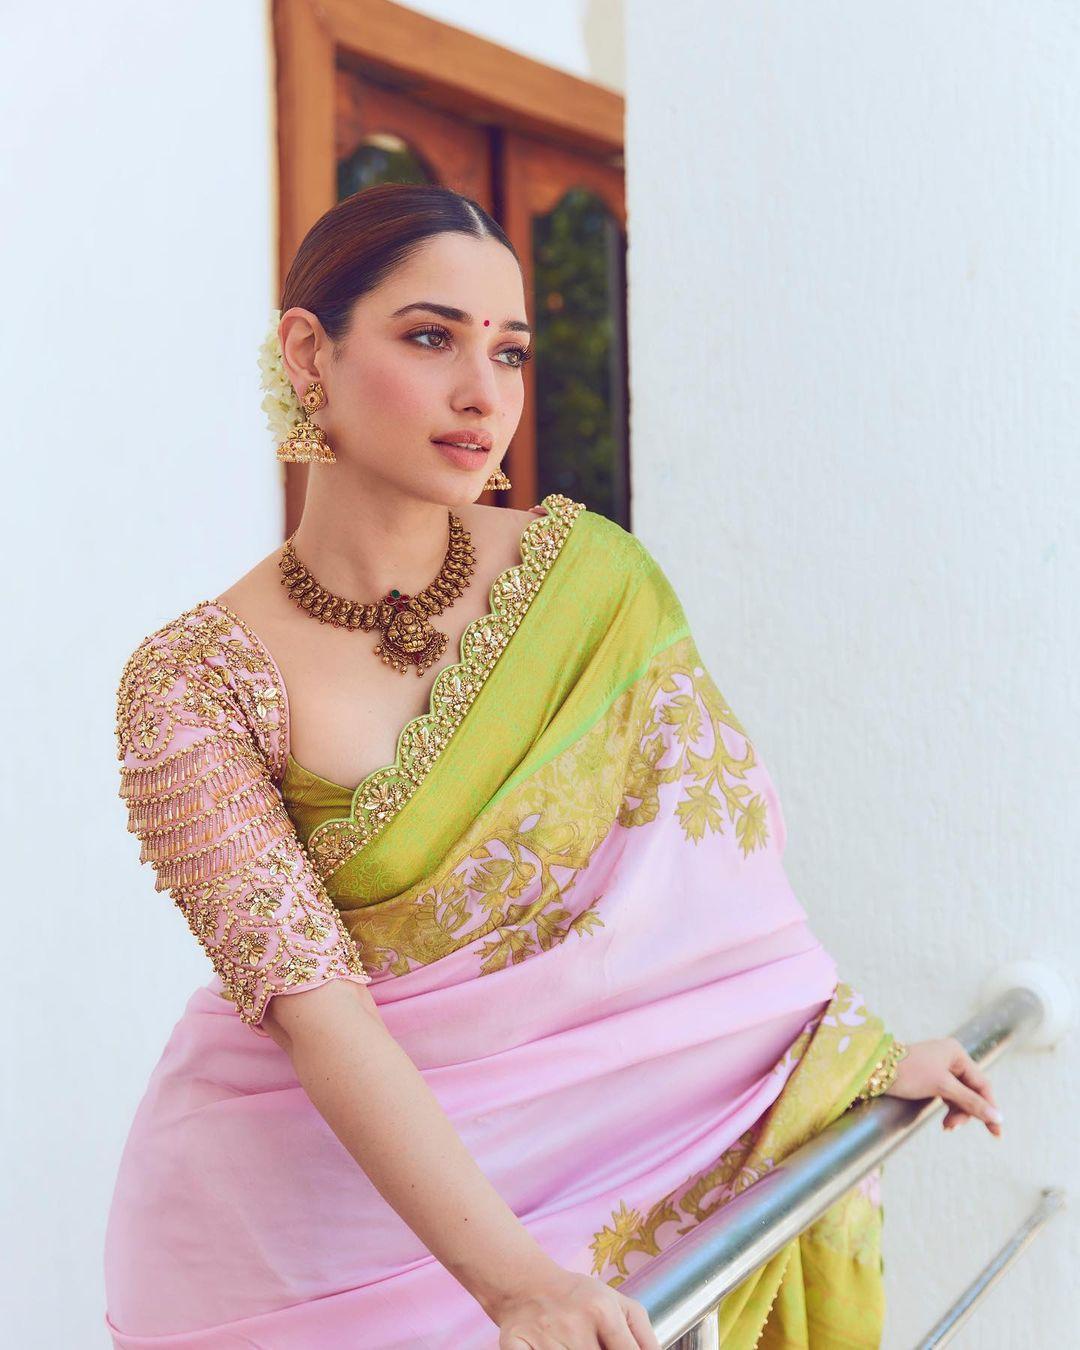 In hues of pink with verdant borders and intricate golden zari work, Tamannaah transformed into a vision. The pink saree gracefully flowed, reflecting her grace and poise. 